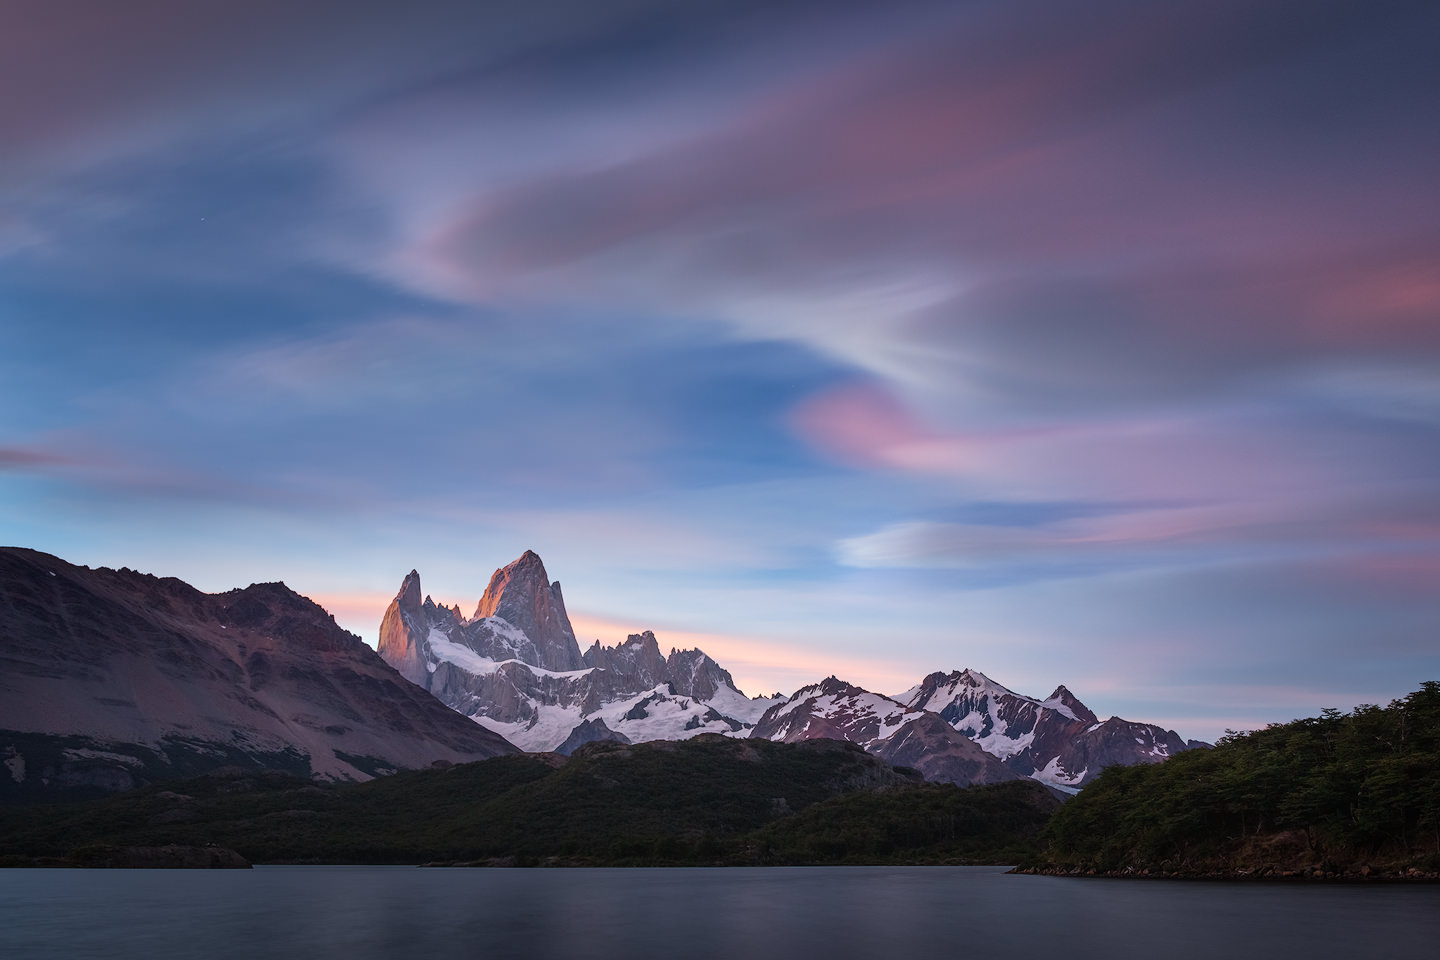 View of Fitz Roy from Laguna Capri after sunset